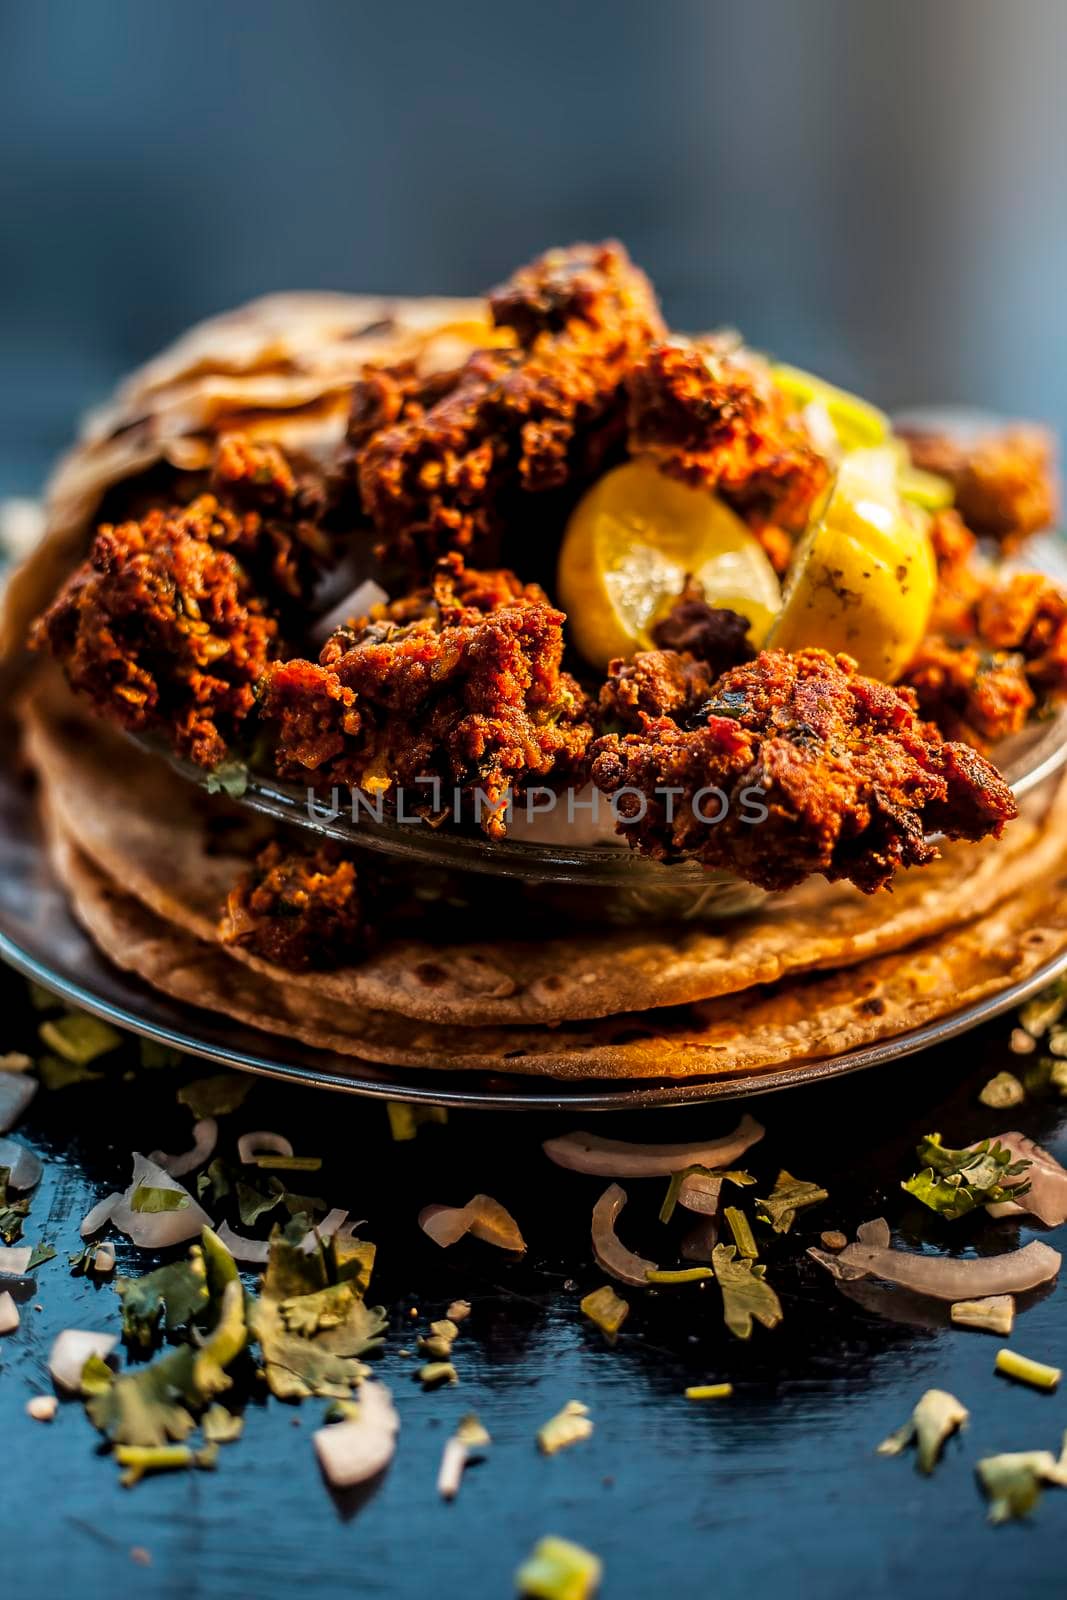 Shot of dry meatballs on top of the tortilla. Shot of kebab or kabab on roti along with some green chilies, lemon, and onion rings on a black surface.